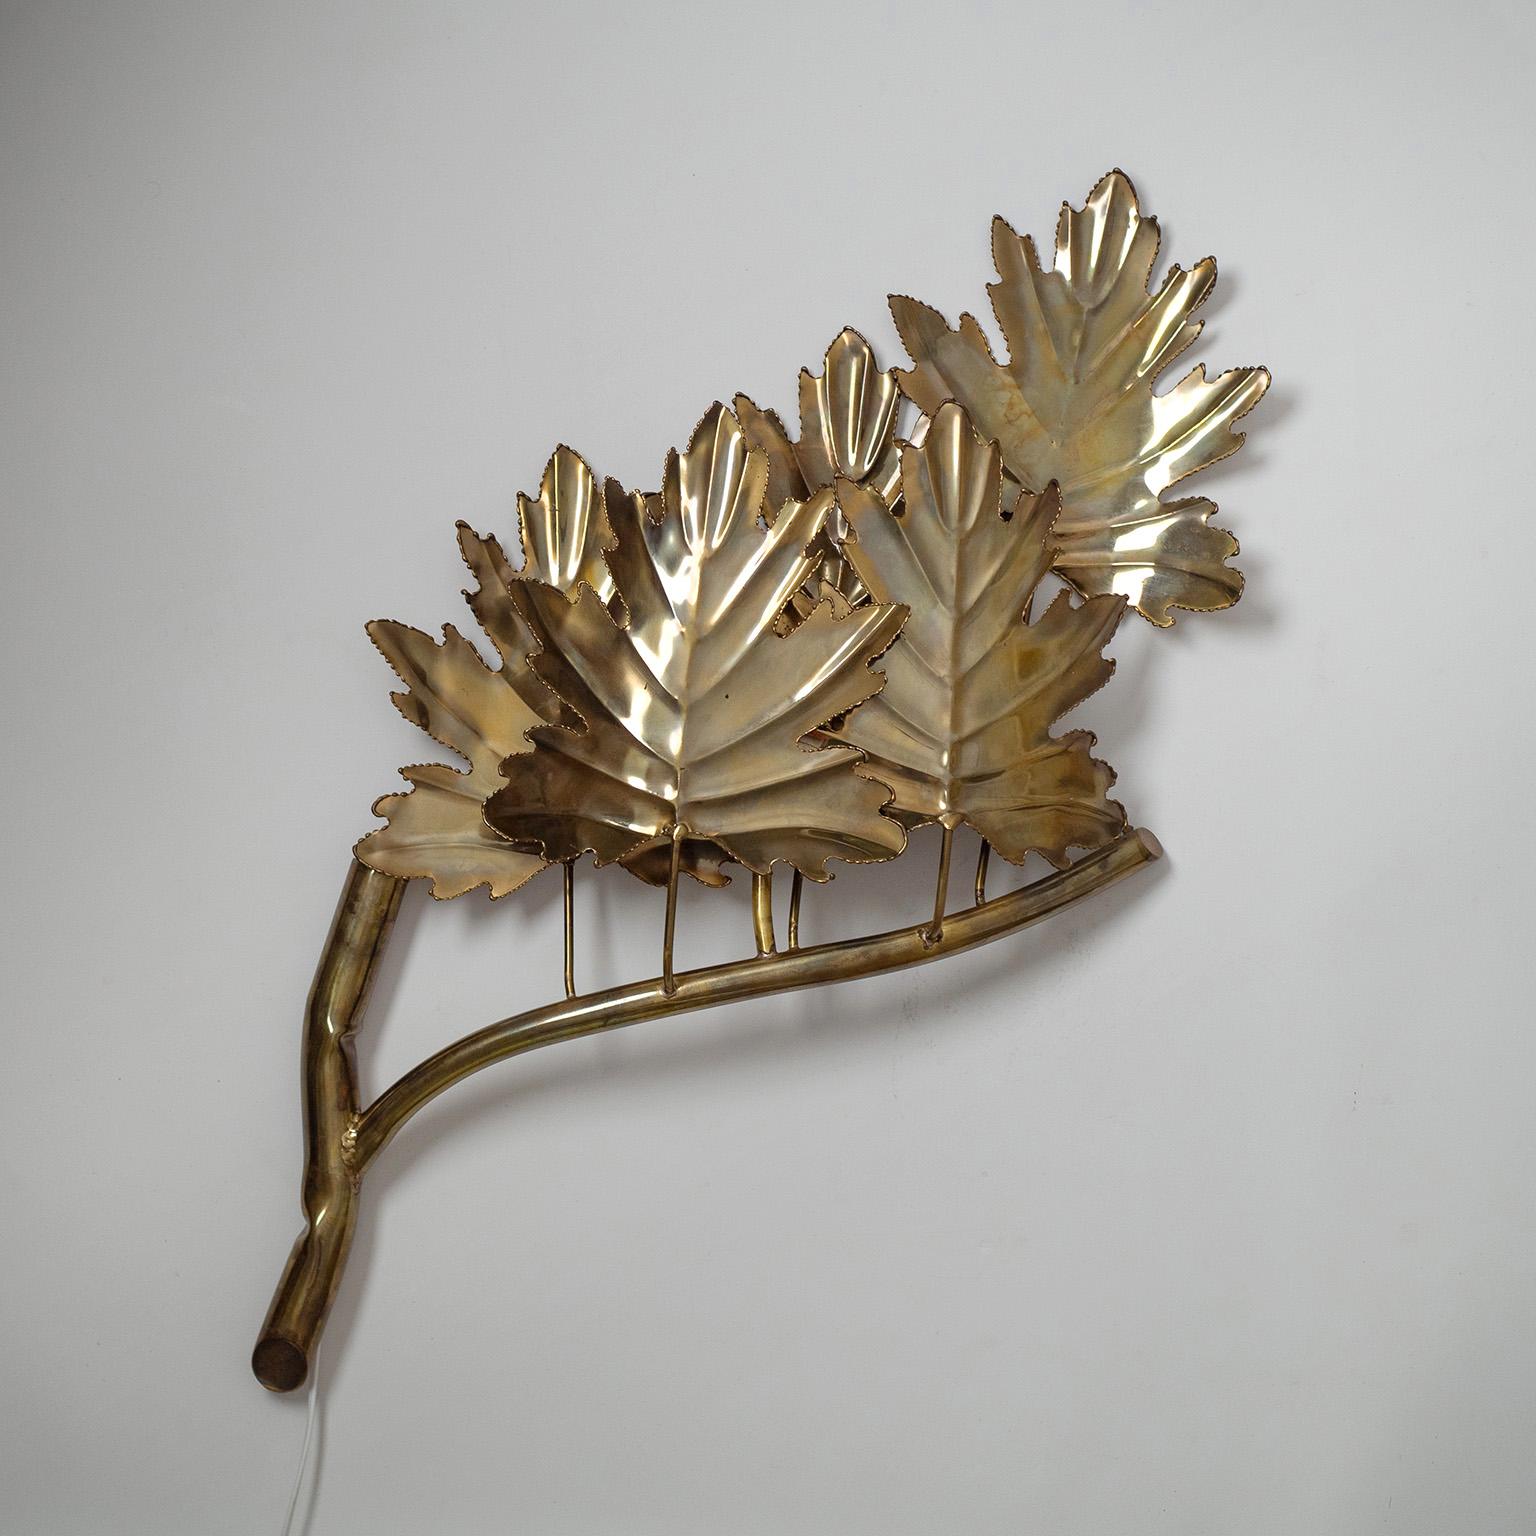 Unique French oversize wall light from the 1970-1980s, quite possibly by Jacques Duval-Brasseur. Very sculptural piece in the shape of a stylized maple branch with leaves. One brass E27 socket with new wiring.
Measures: height 90cm (35.5?), width